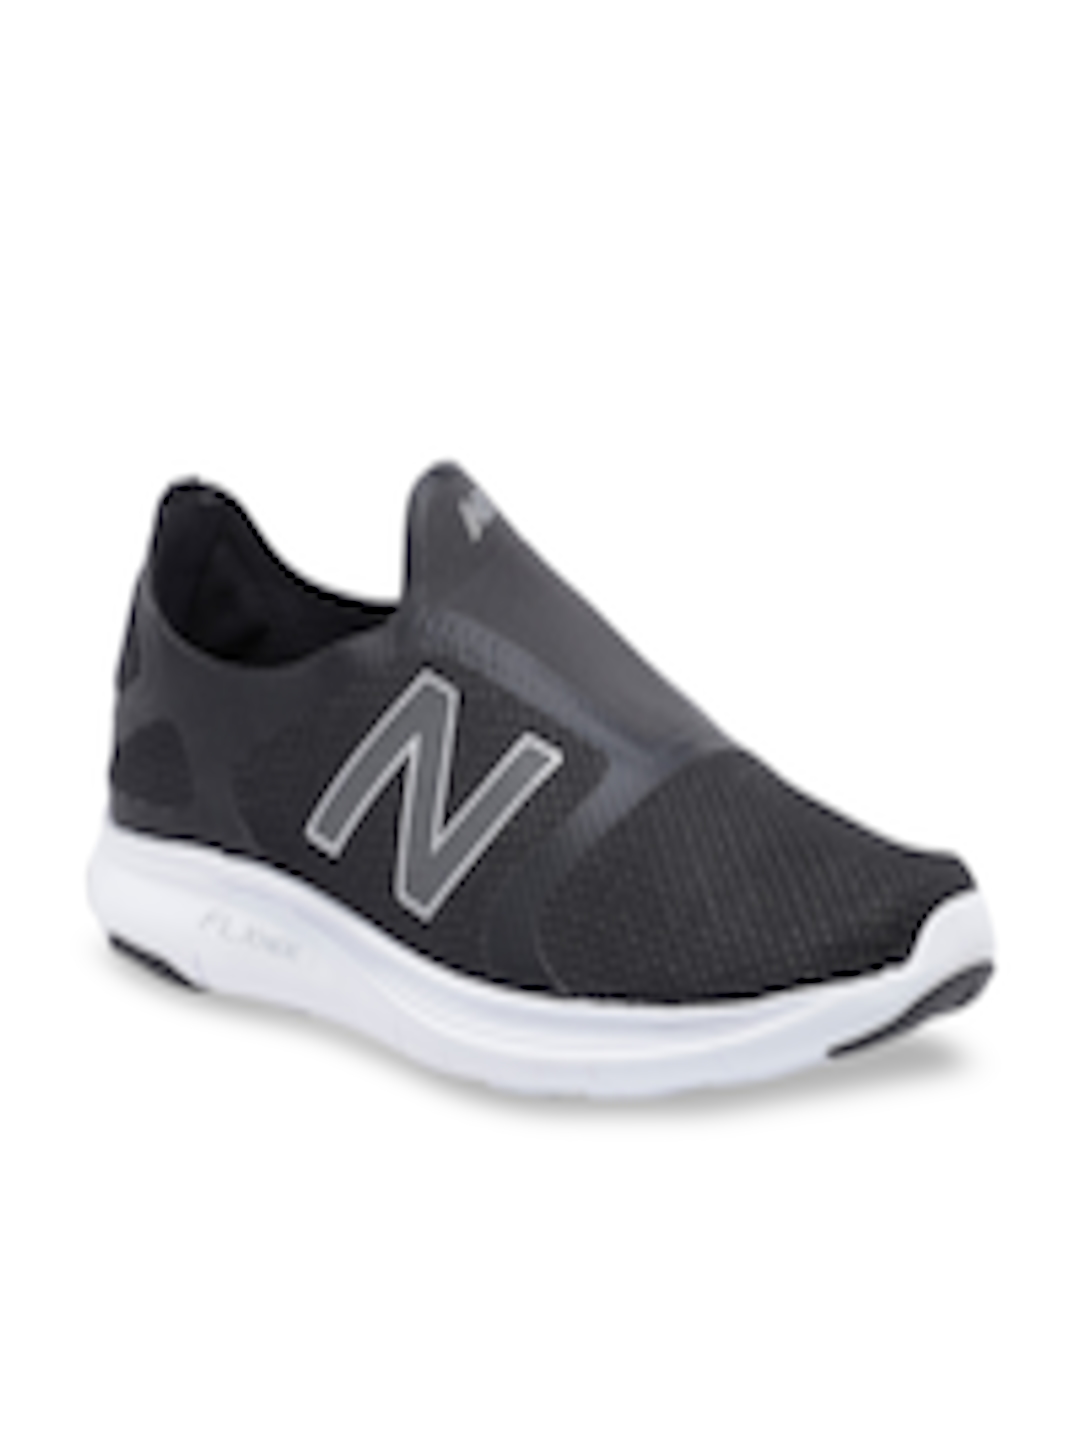 Buy New Balance Men Black Synthetic Running Shoes - Sports Shoes for ...